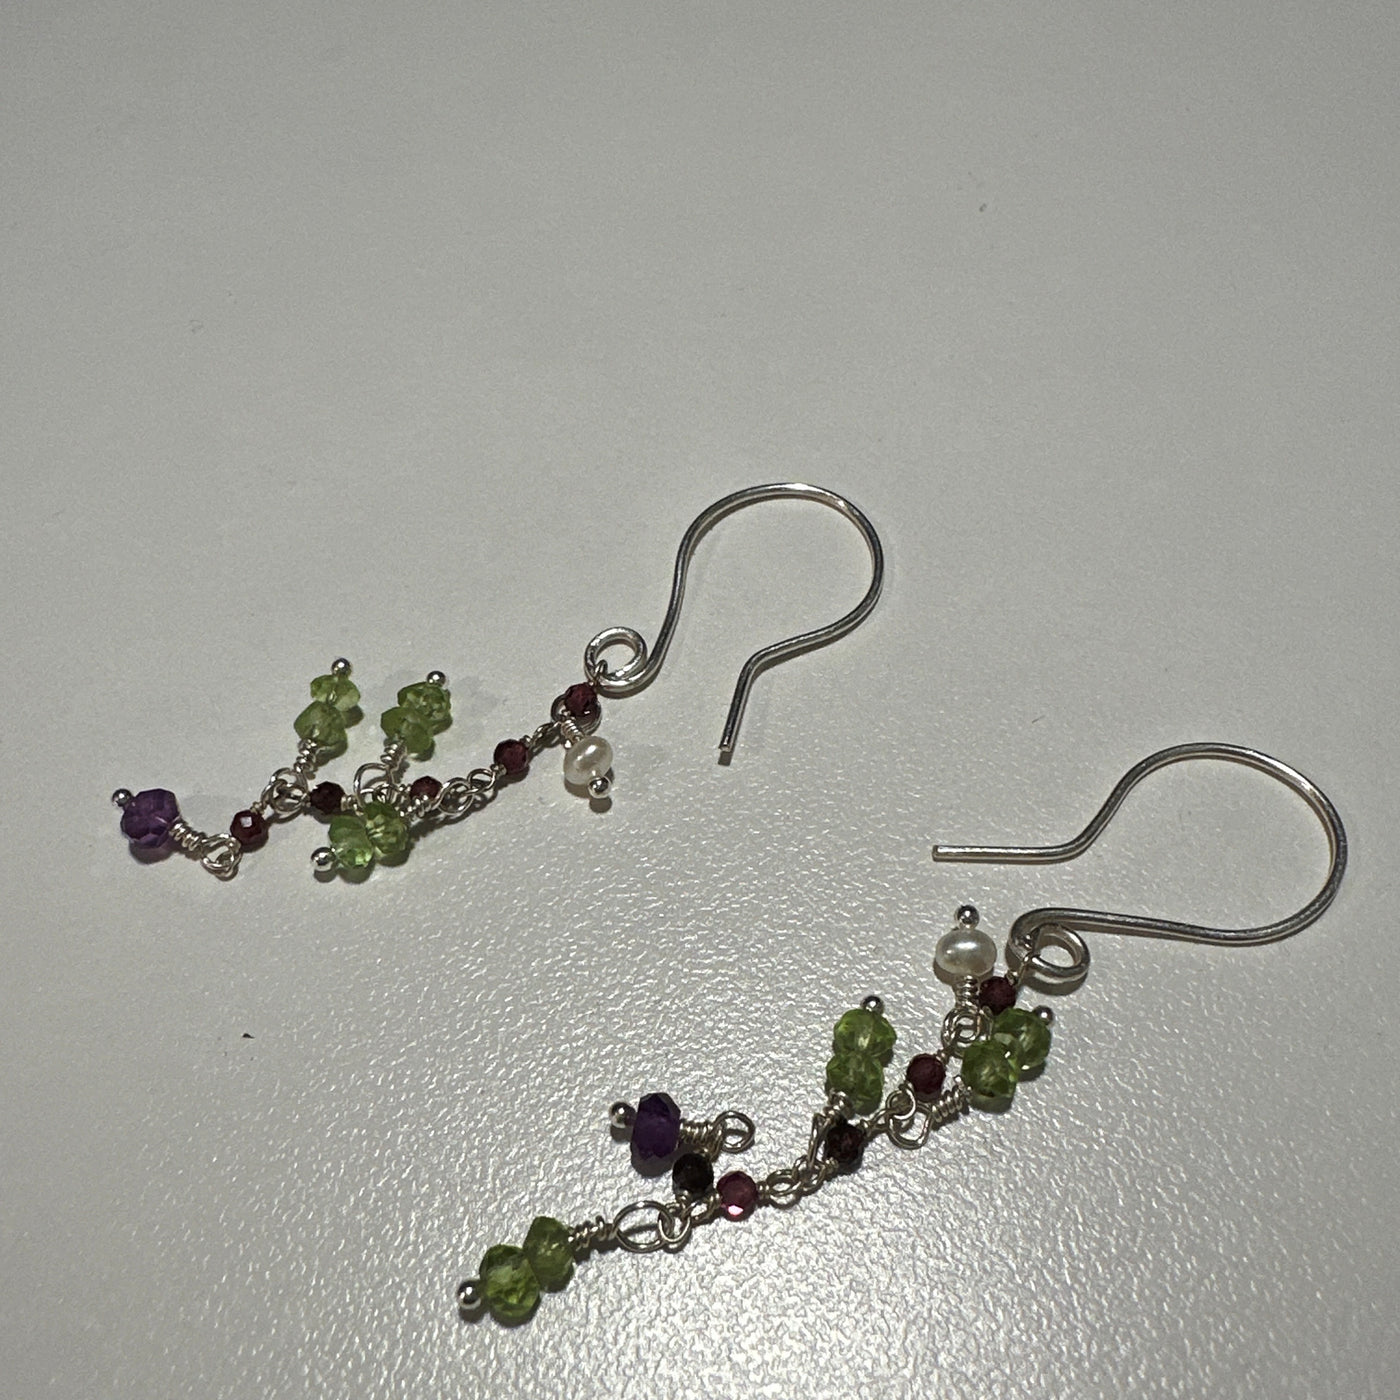 Peridot, oval pearls and amethysts on silver earrings